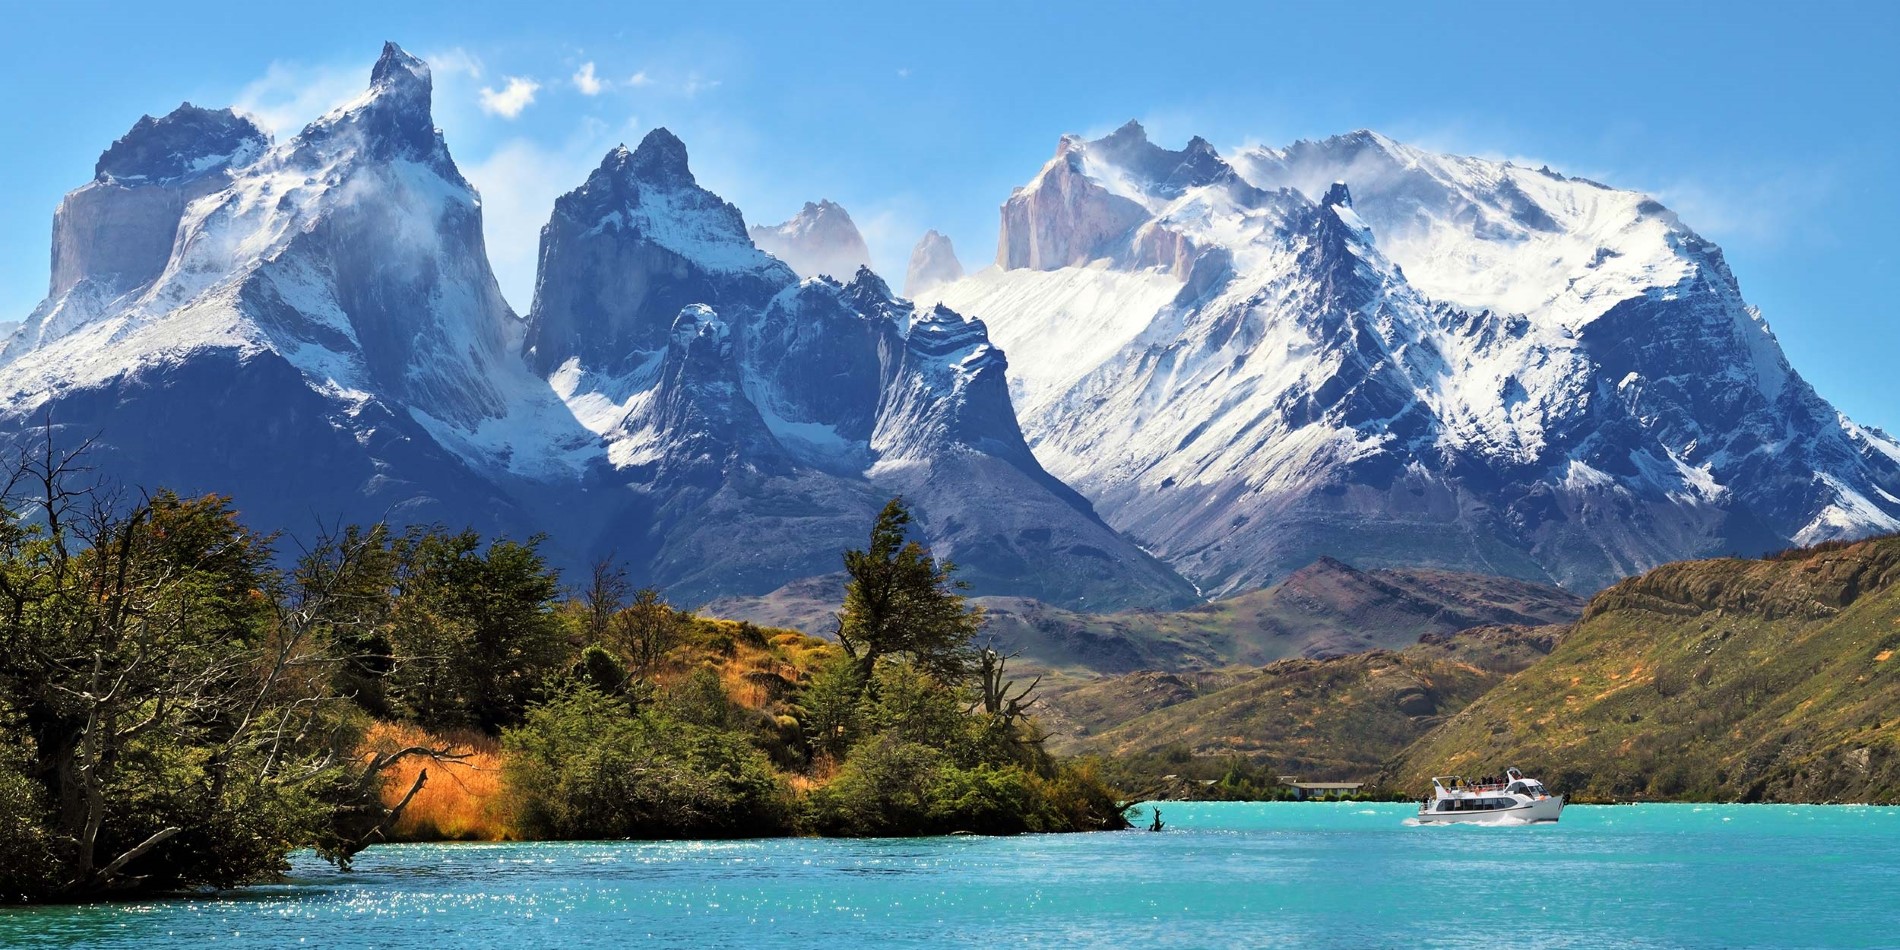 A view of a snow covered mountain with Torres del Paine National Park in the background